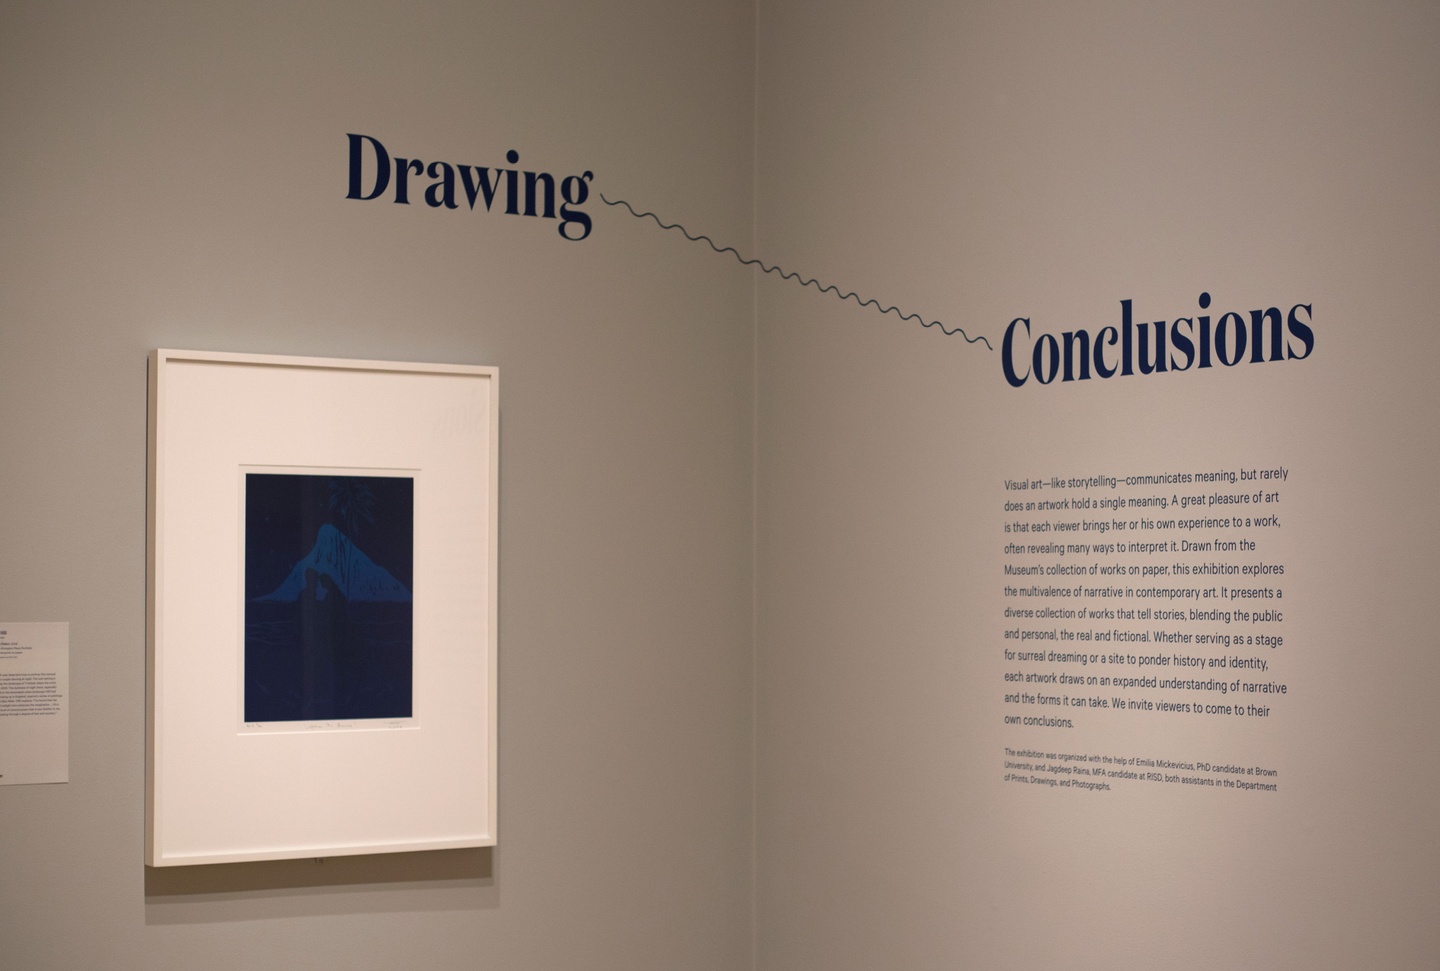 The corner of a gallery space with light gray/cream walls, with the words "Drawing Conclusions" connected across the corner with a wavy line. To the left is a framed artwork; to the right, some wall text.